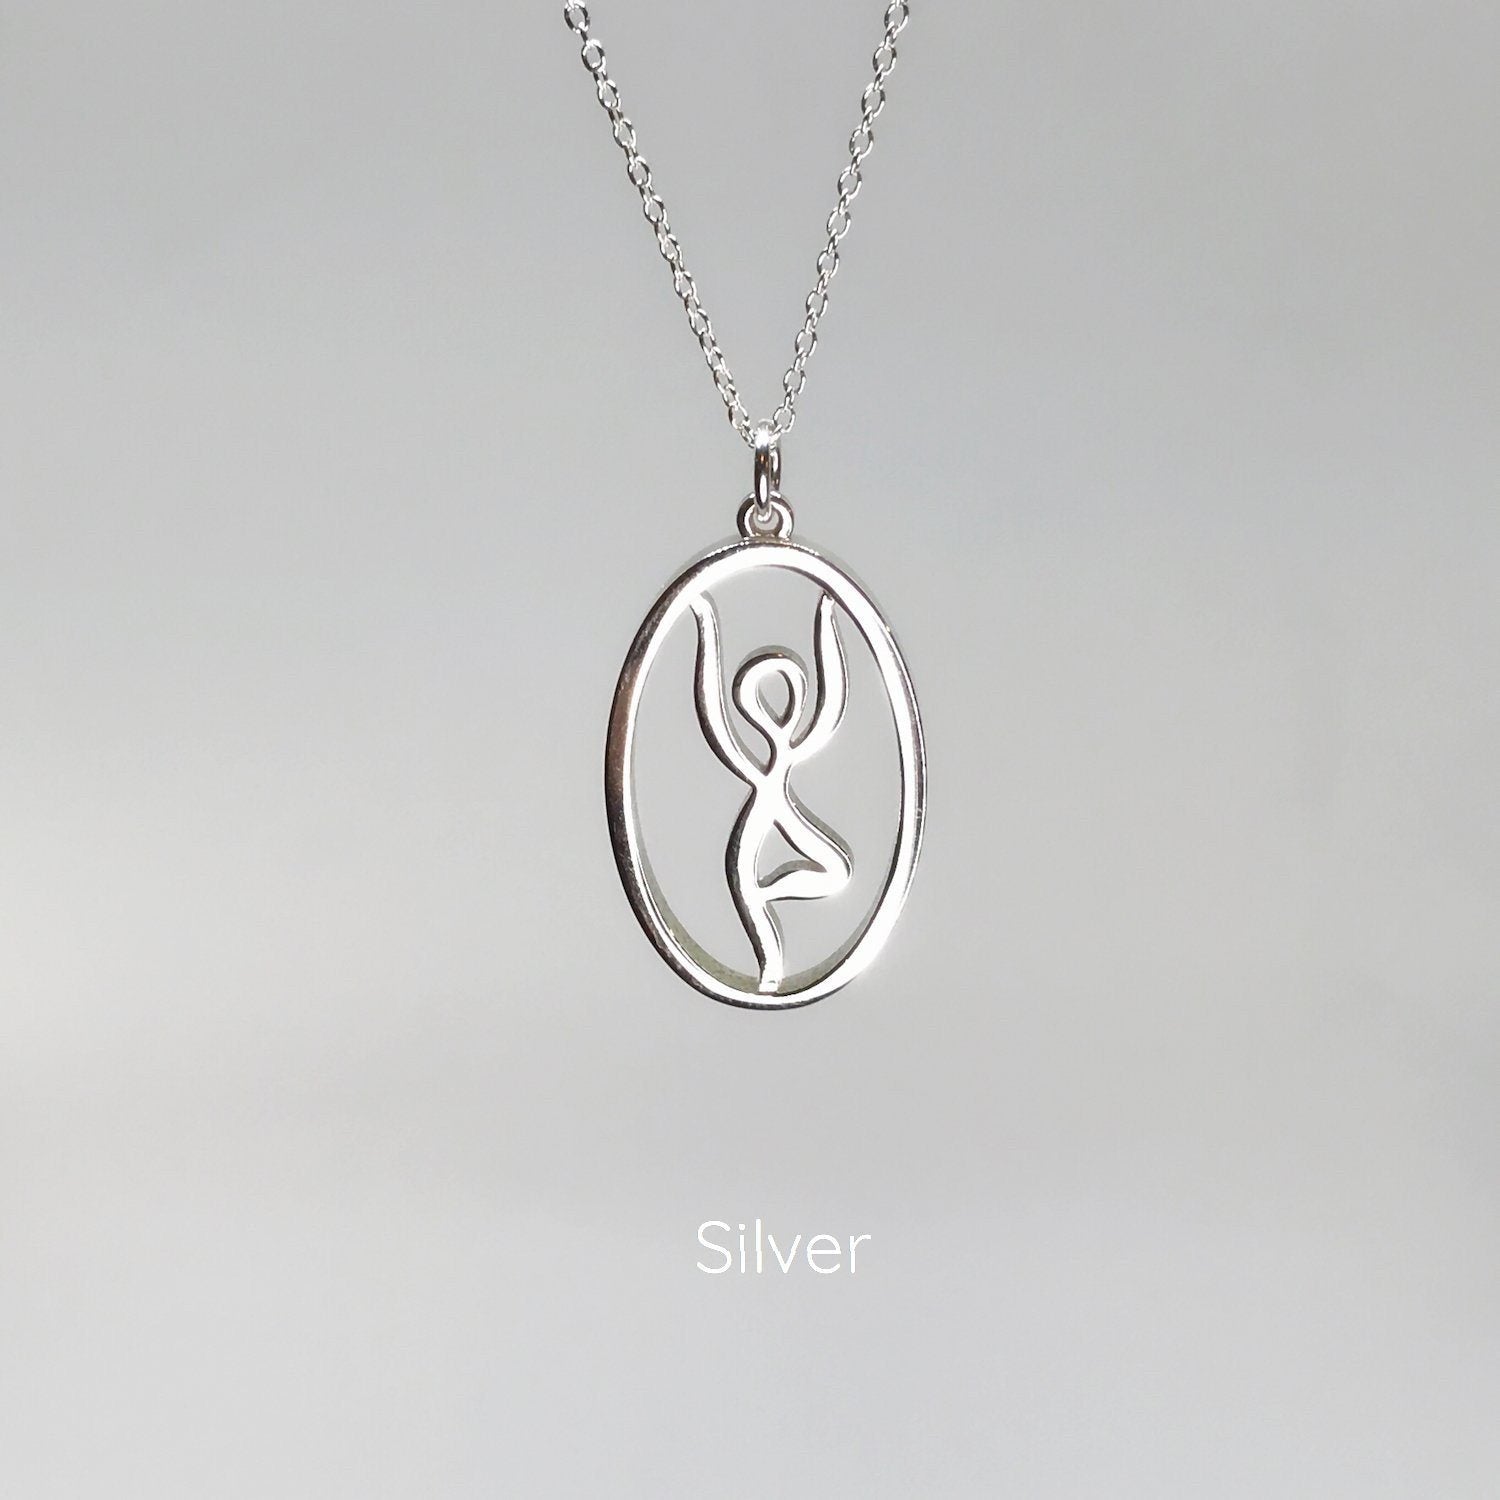 Sterling Silver Yoga Necklace - Tree Pose Pendant